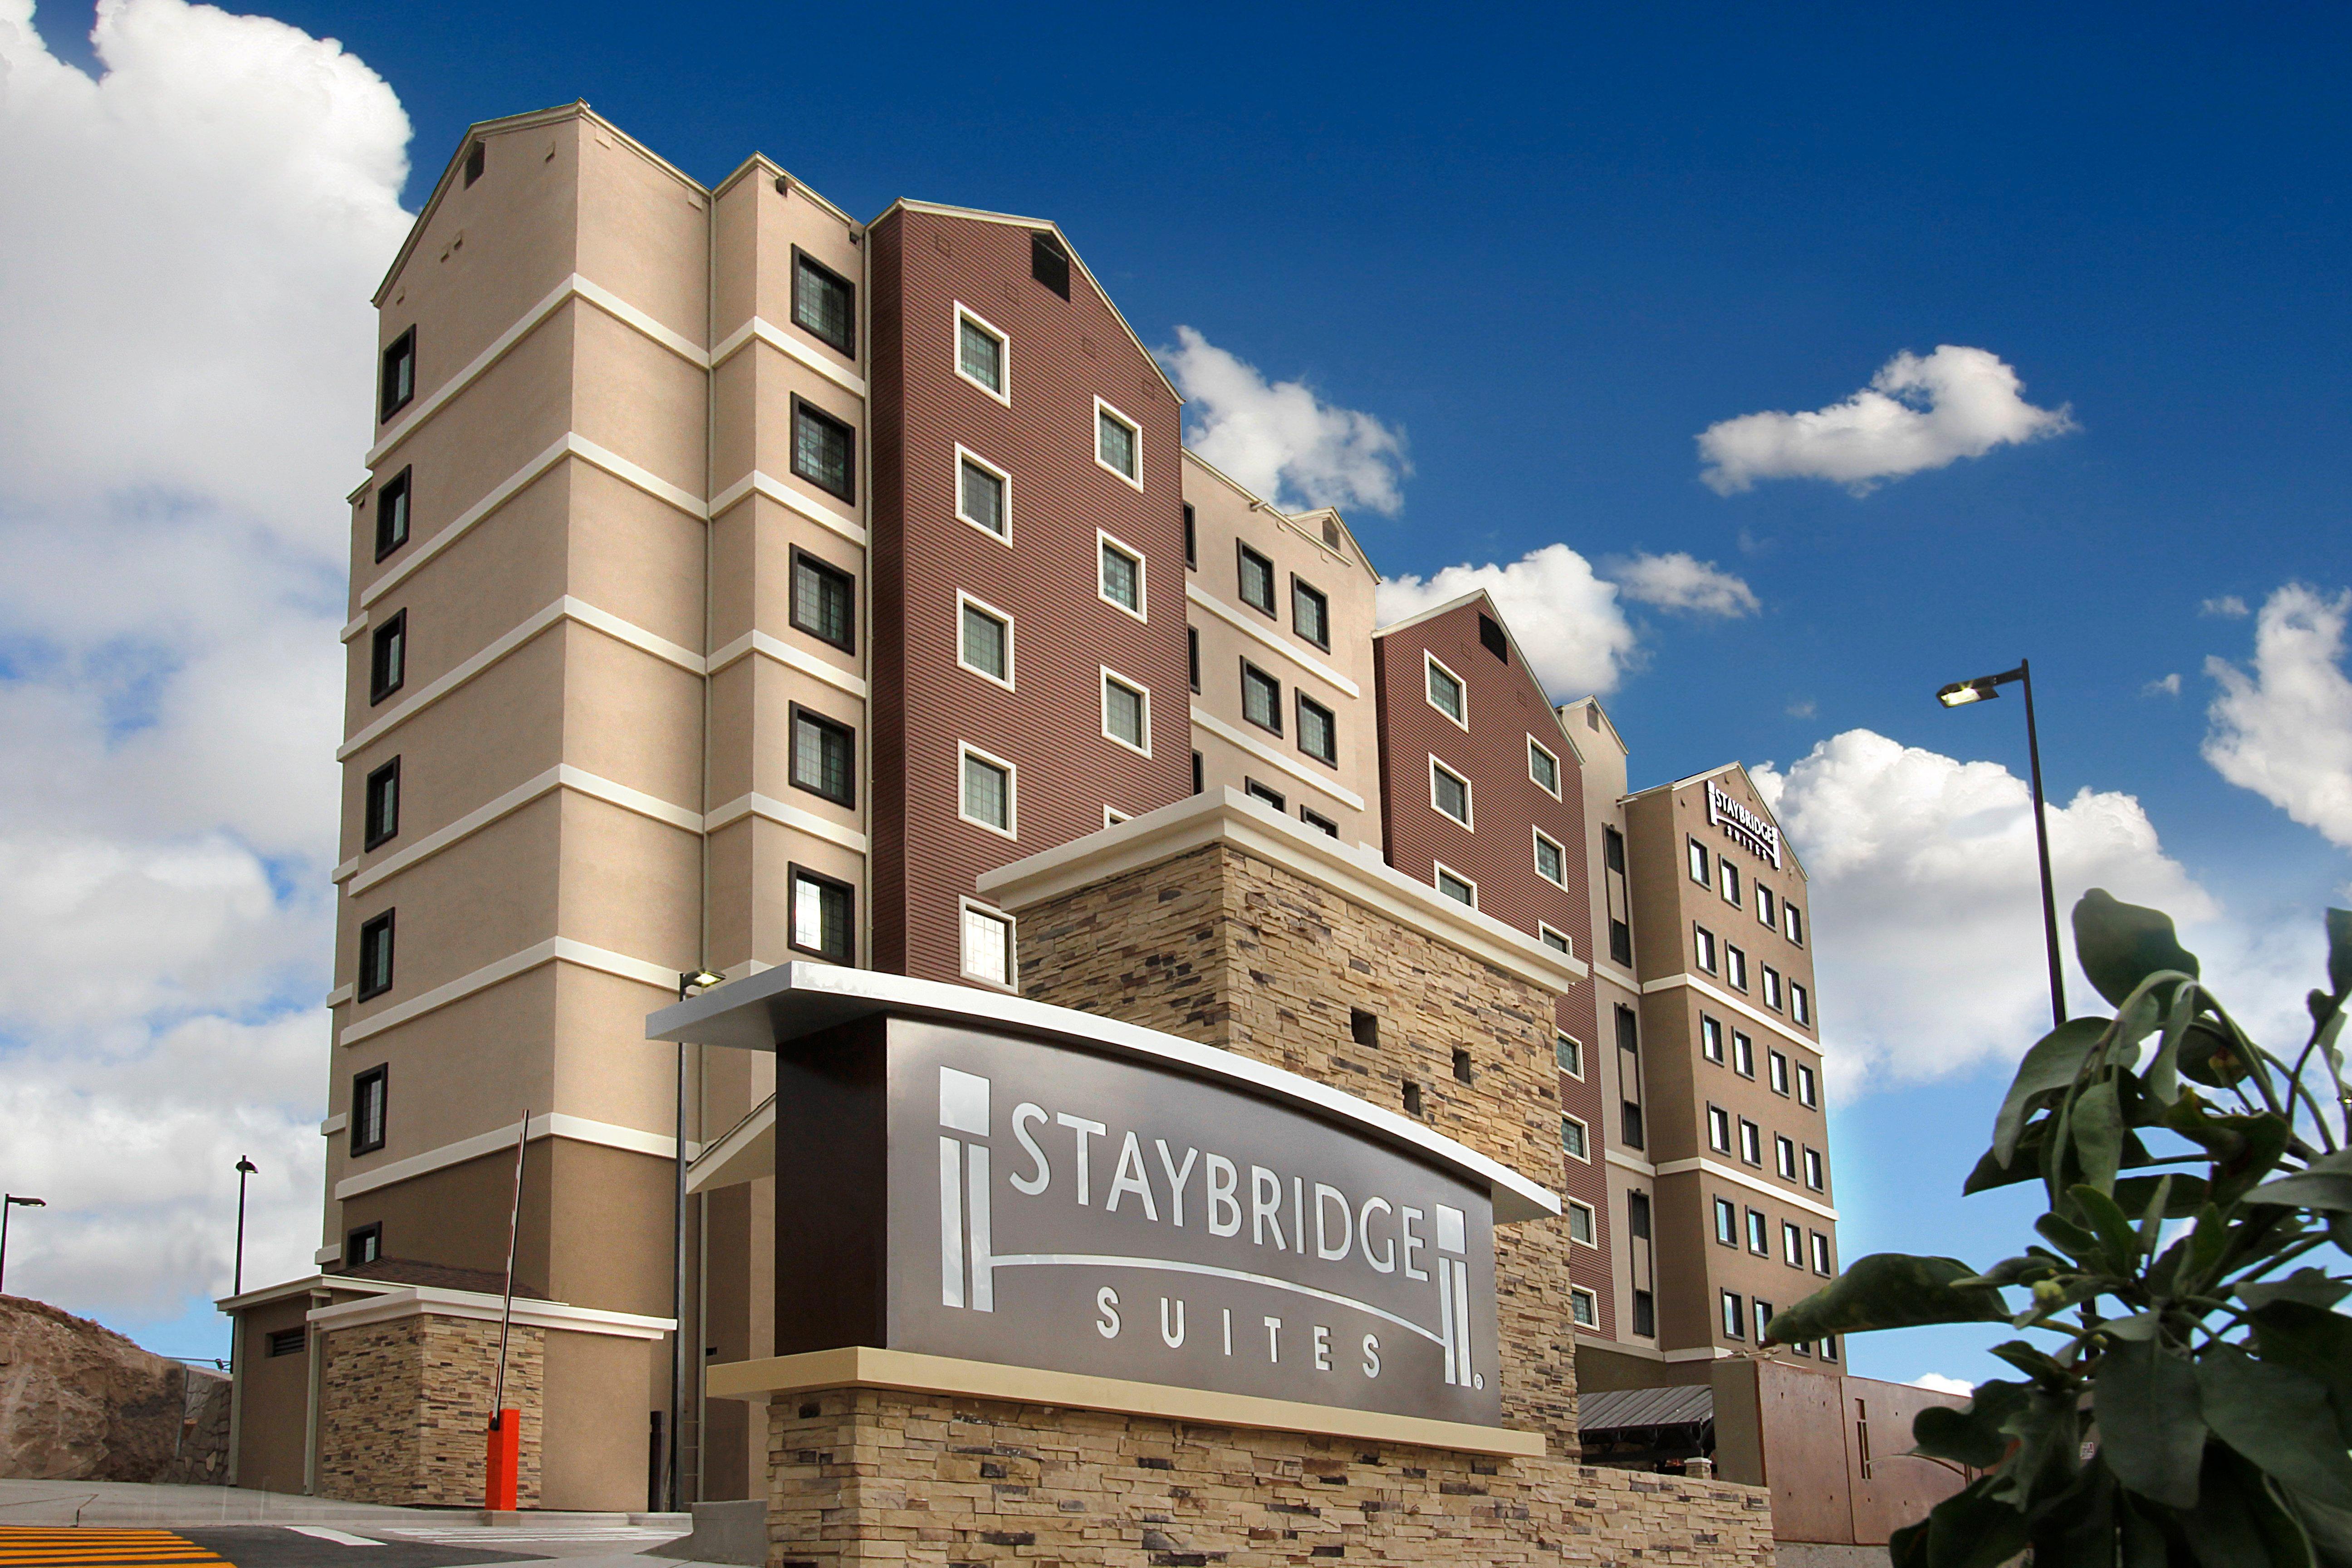 HOTEL STAYBRIDGE SUITES CHIHUAHUA 3* (Mexico) - from US$ 82 | BOOKED